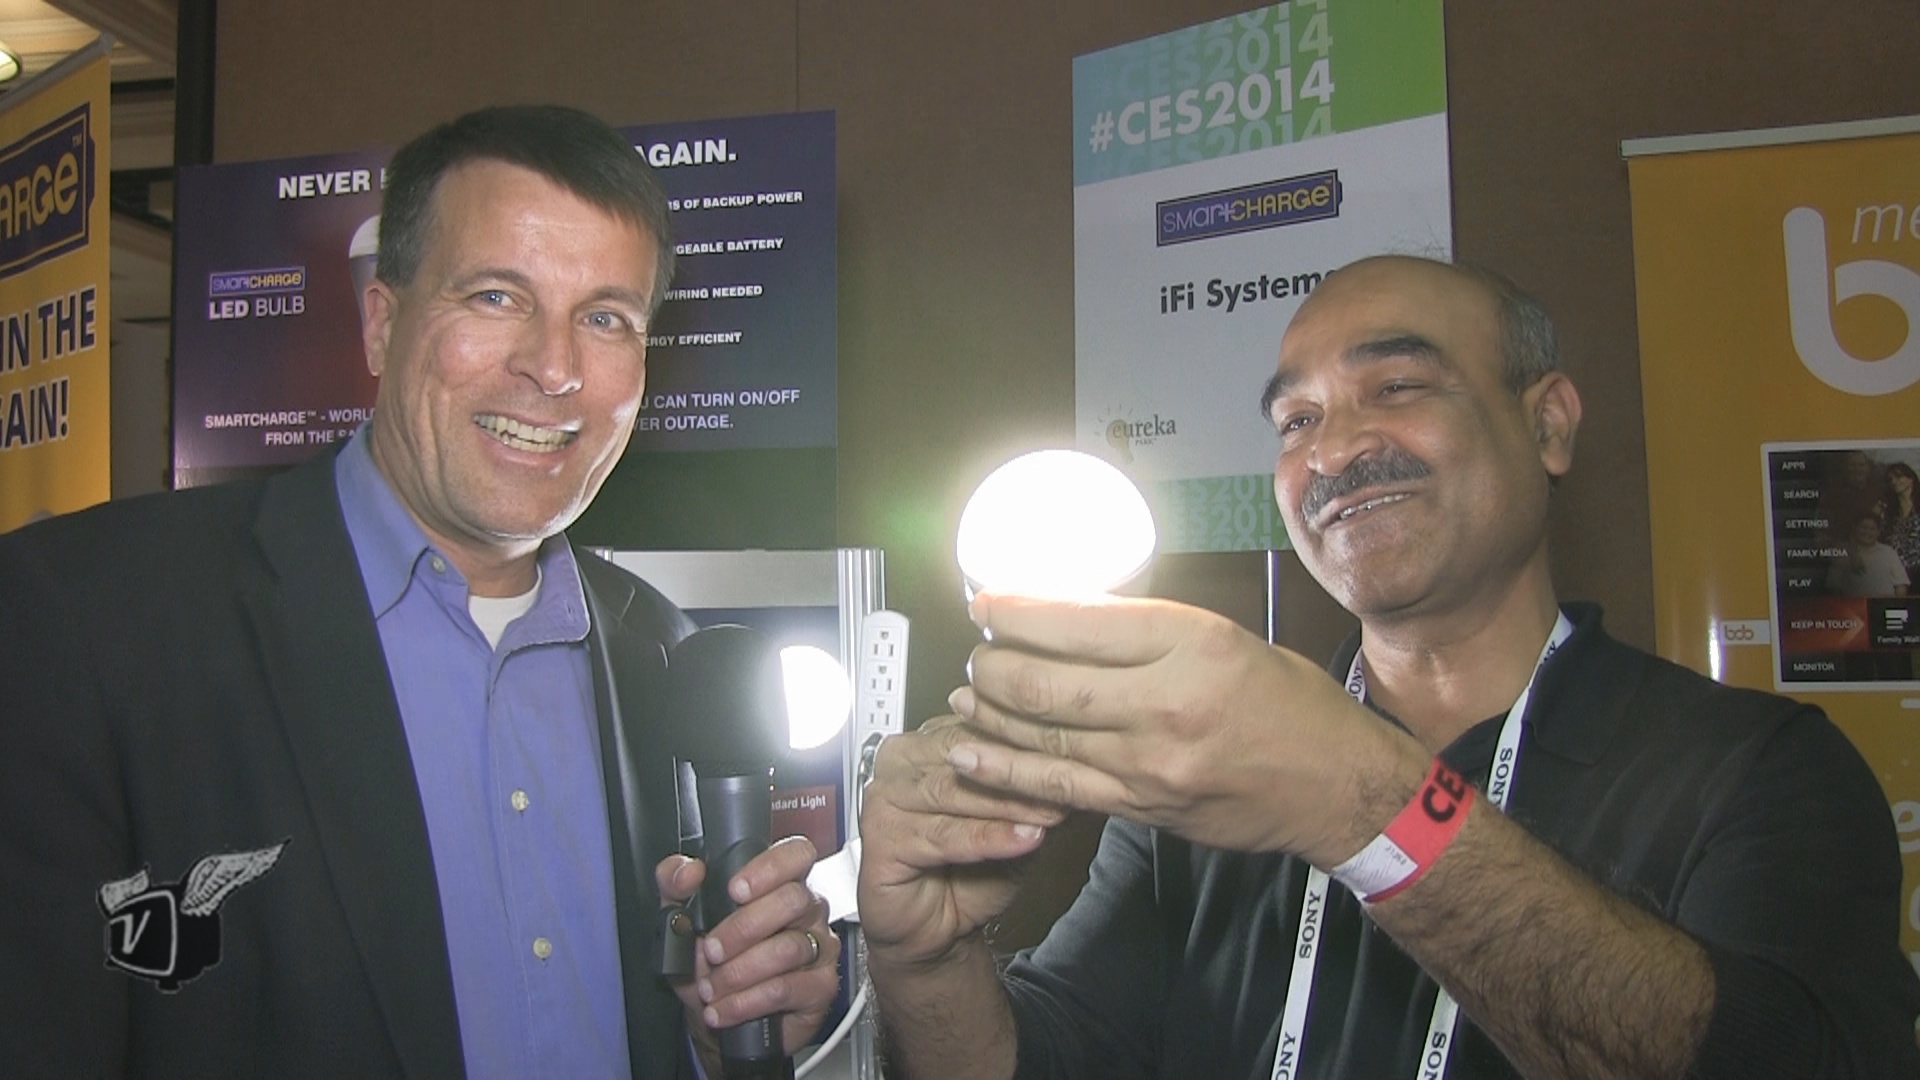 A demonstration of the SmartCharge LED battery backed-up, light bulb at CES 2014.